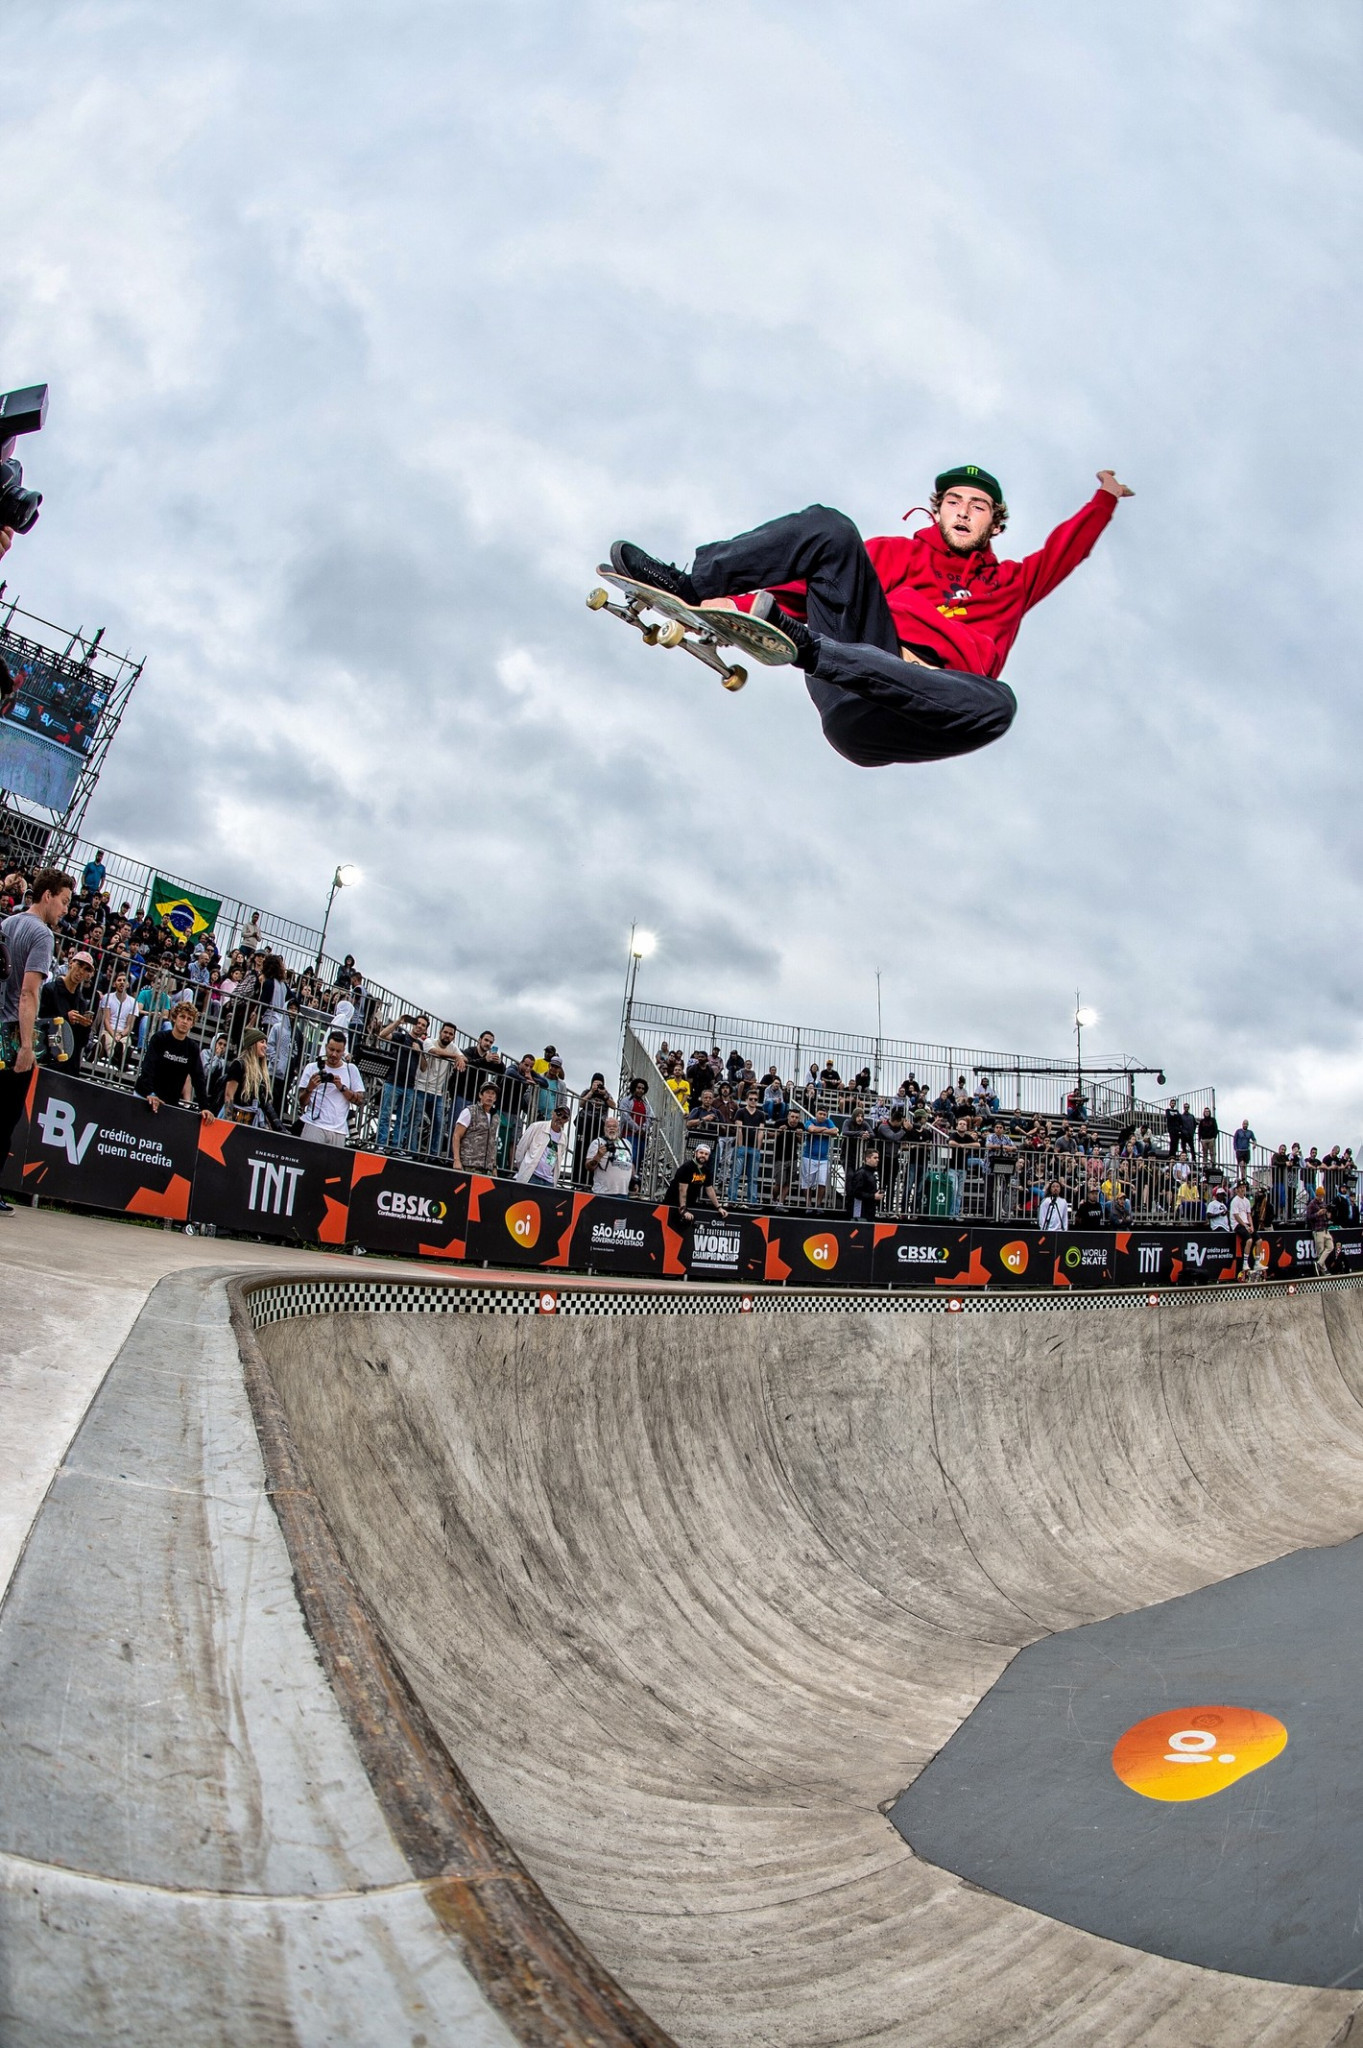 Thomas Schaar of the United States, who had topped open qualifying, took first place in the men's quarter-finals at the World Skate Park World Championship in São Paulo ©World Skate